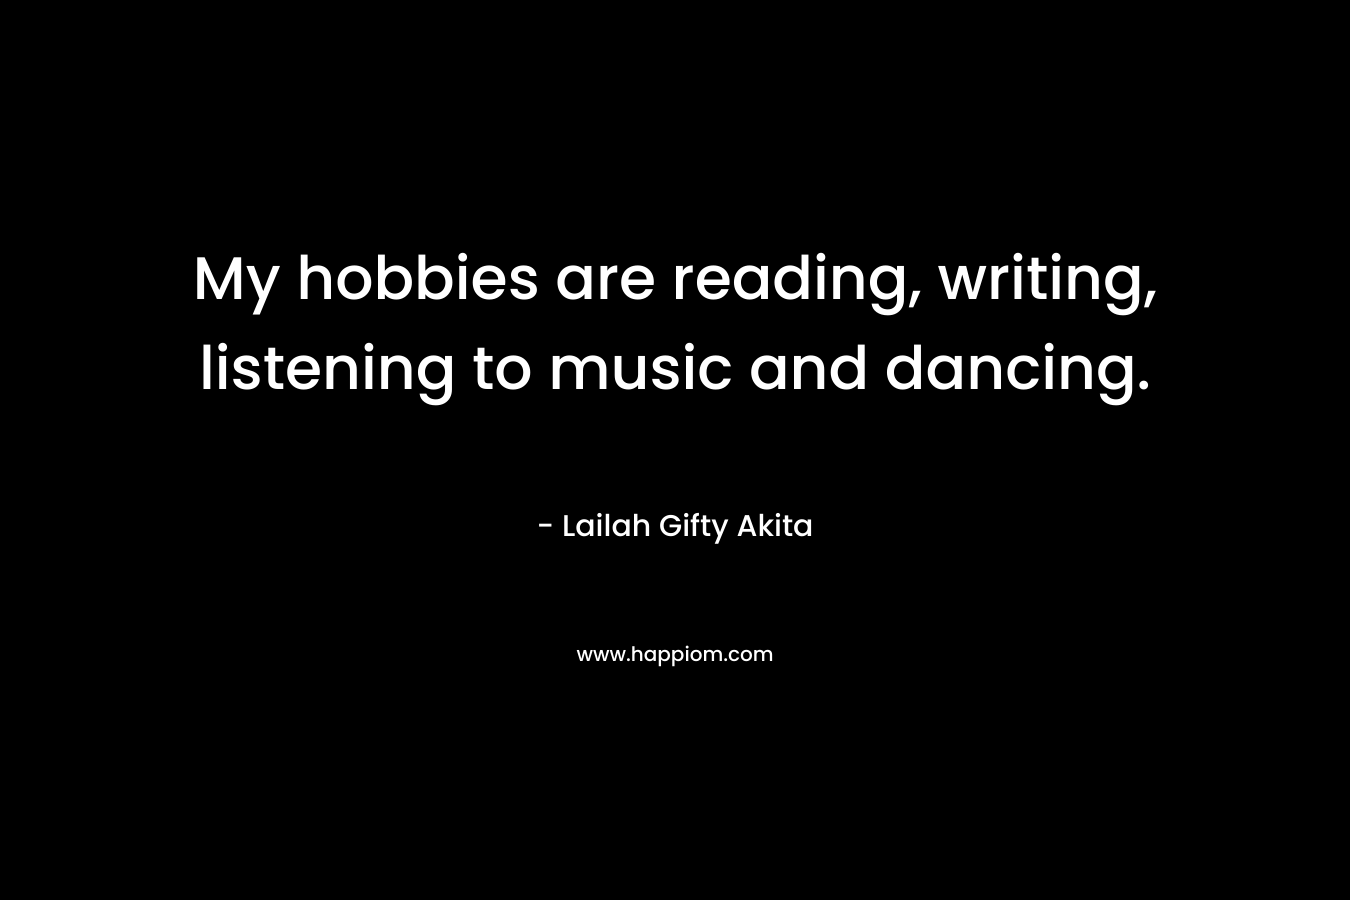 My hobbies are reading, writing, listening to music and dancing. – Lailah Gifty Akita